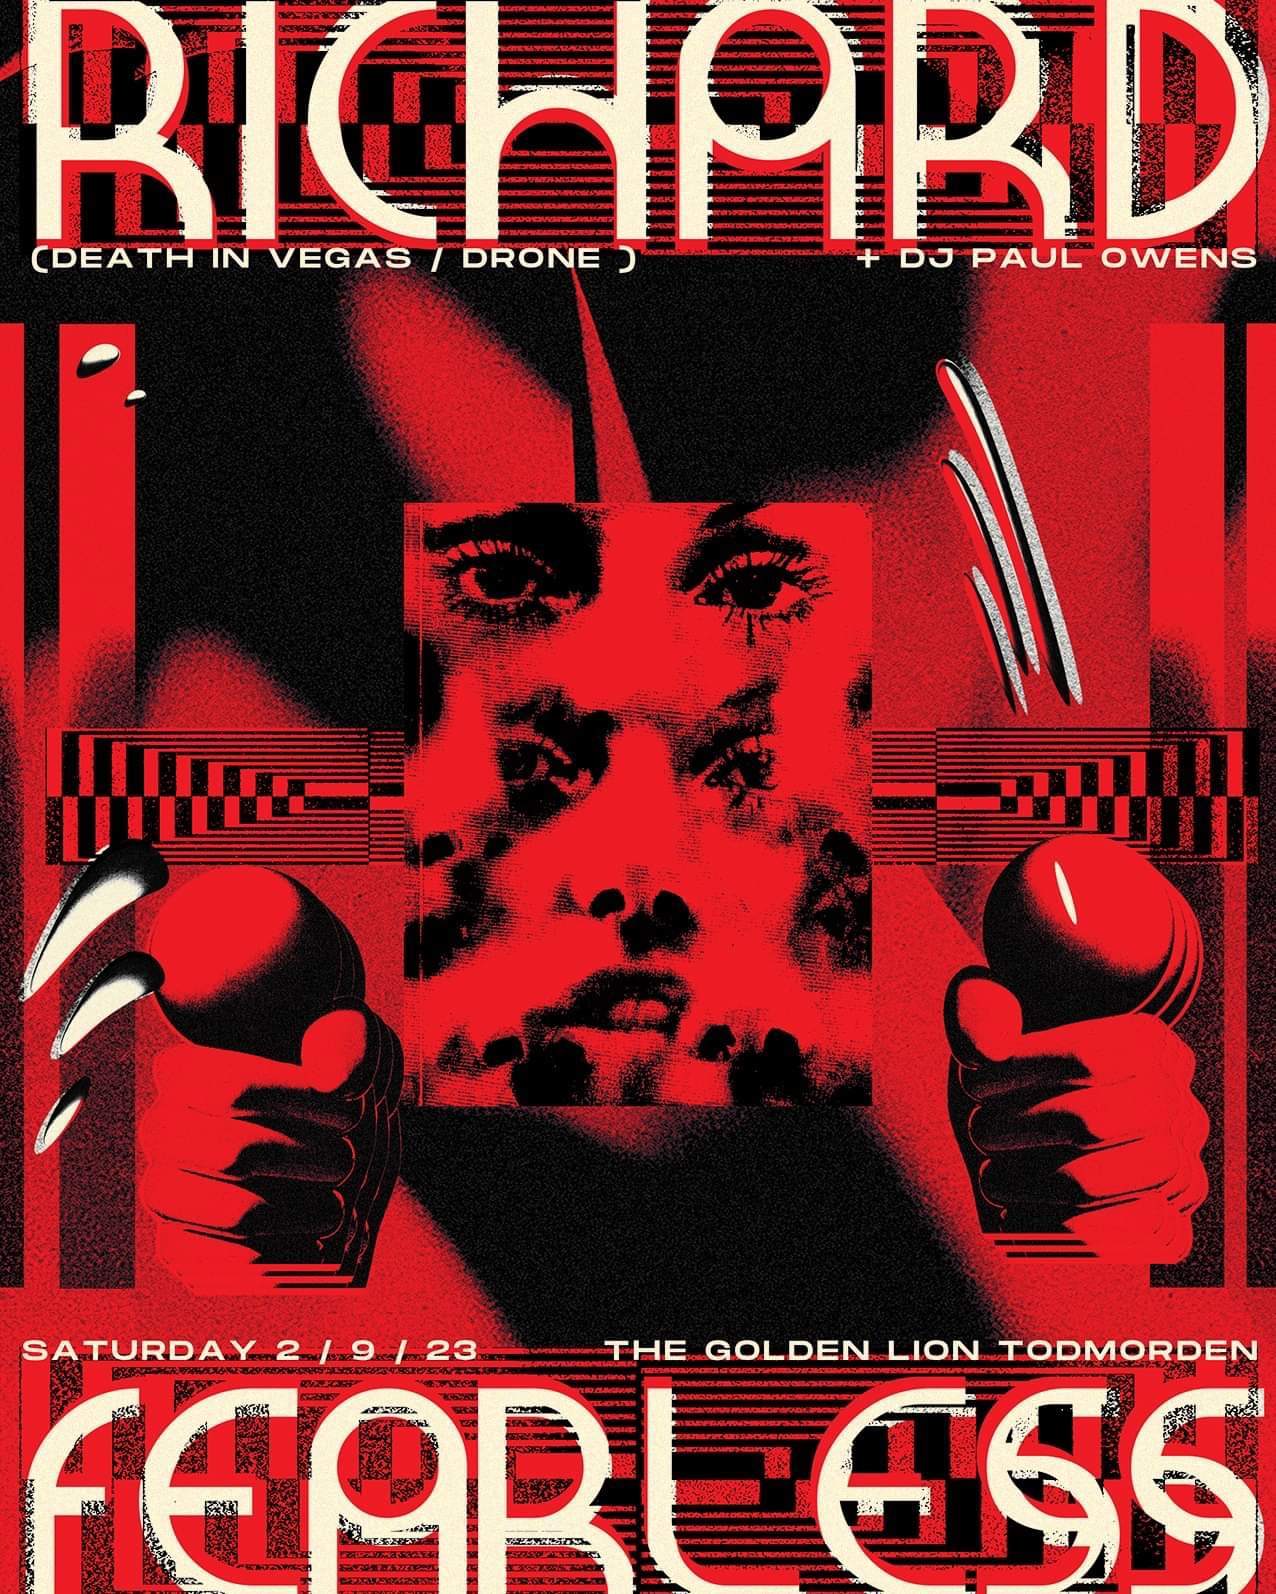 [CANCELLED] Richard Fearless (Death in Vegas / Drone) at Golden Lion, Todmorden - フライヤー表